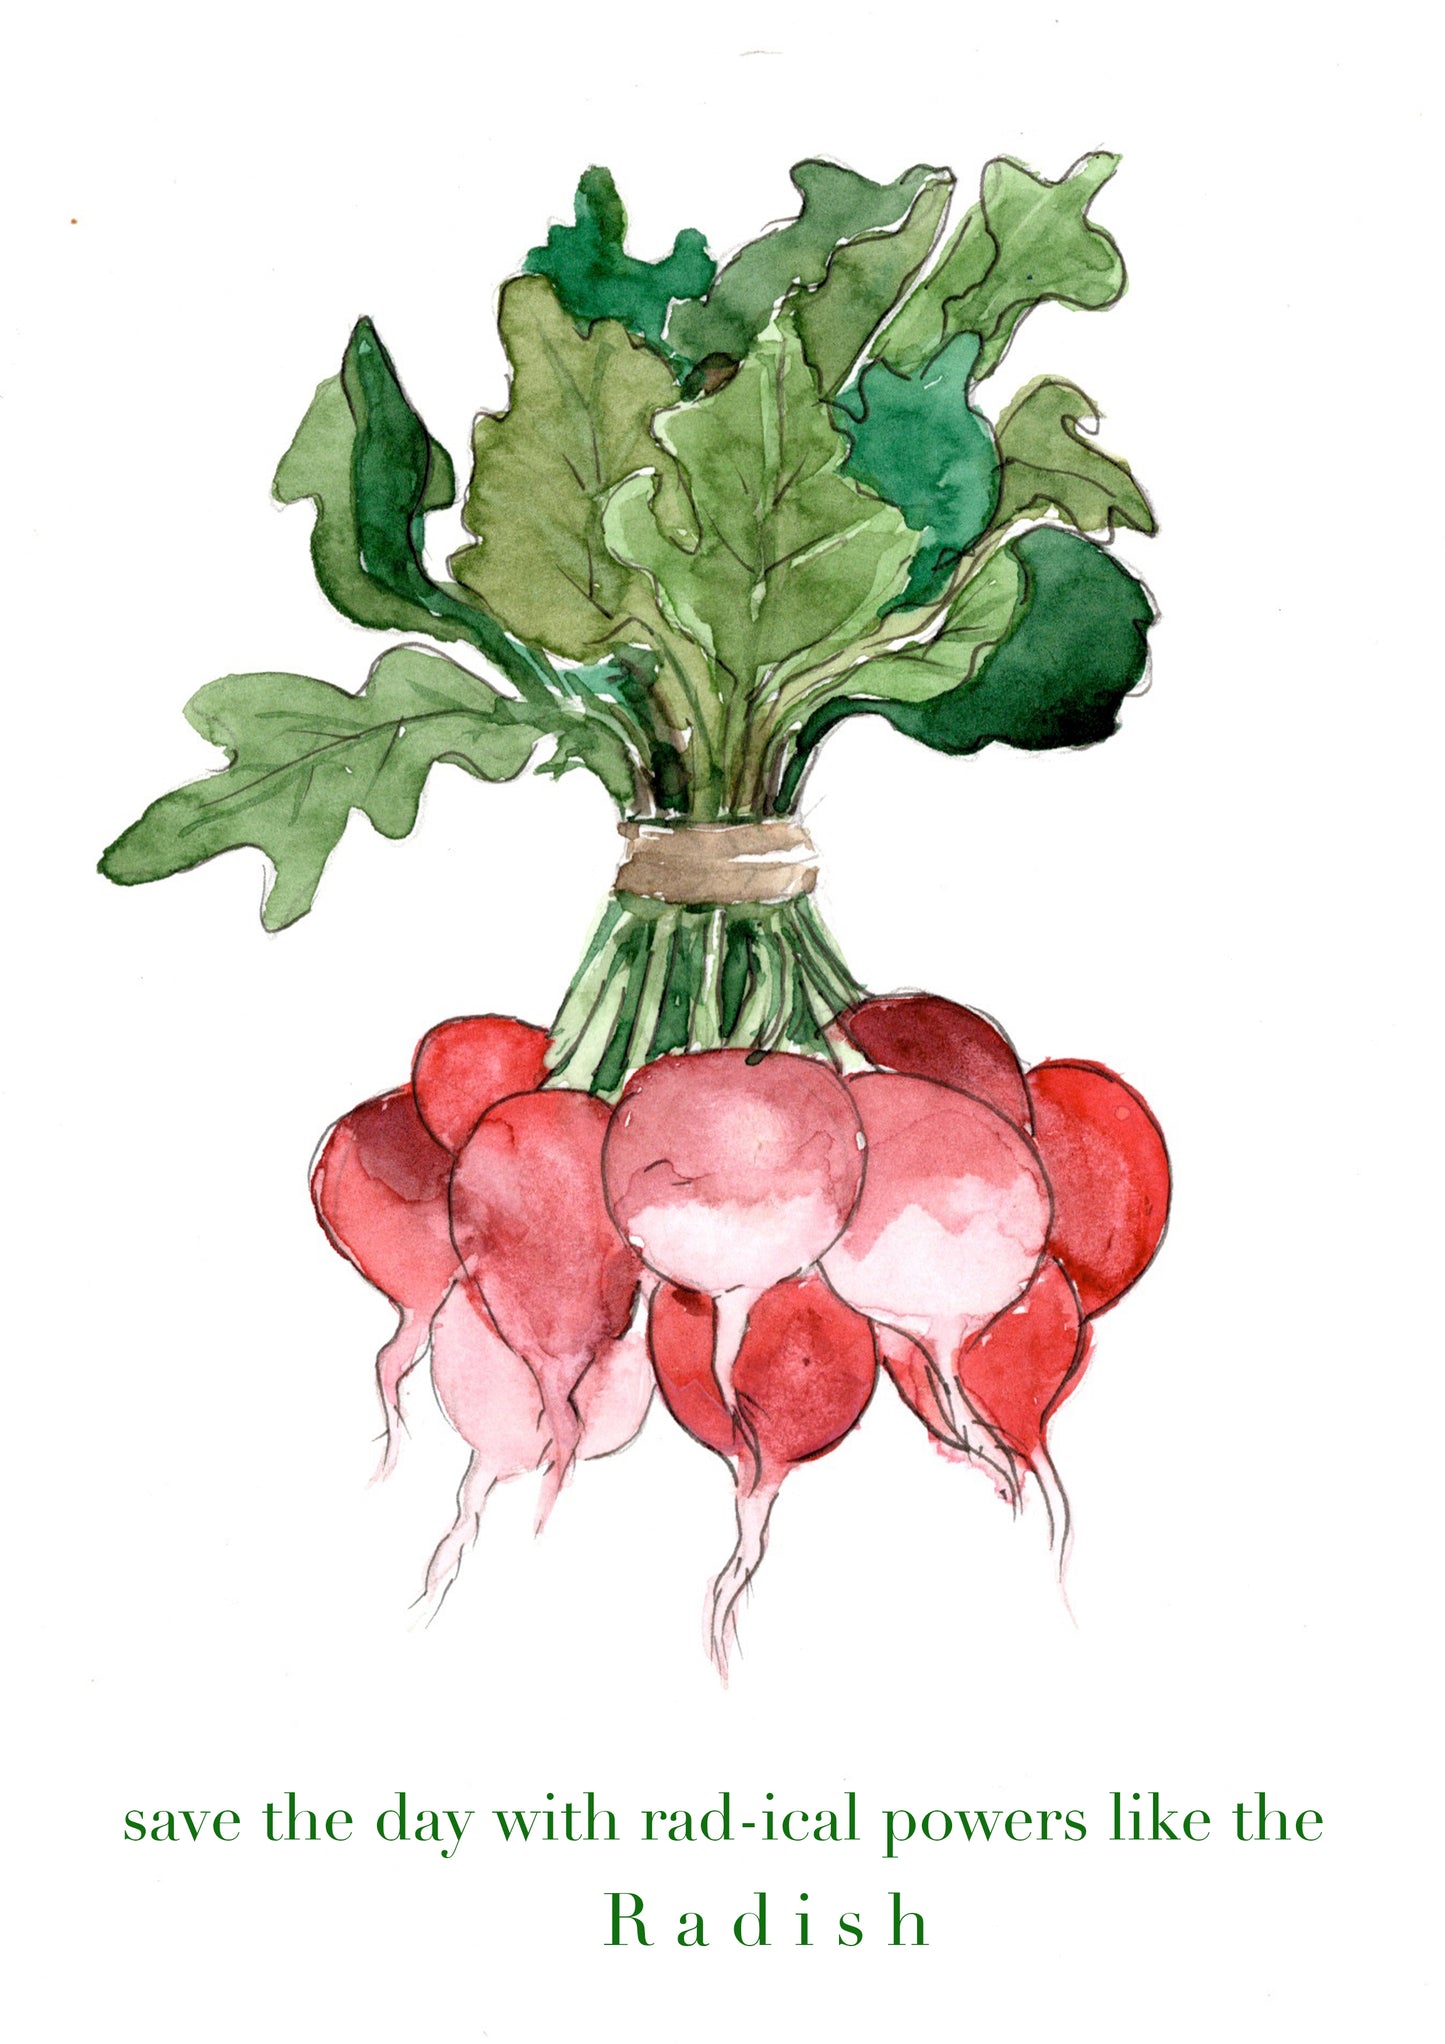 T-Shirt "Save the day with rad-ical powers like the radish"